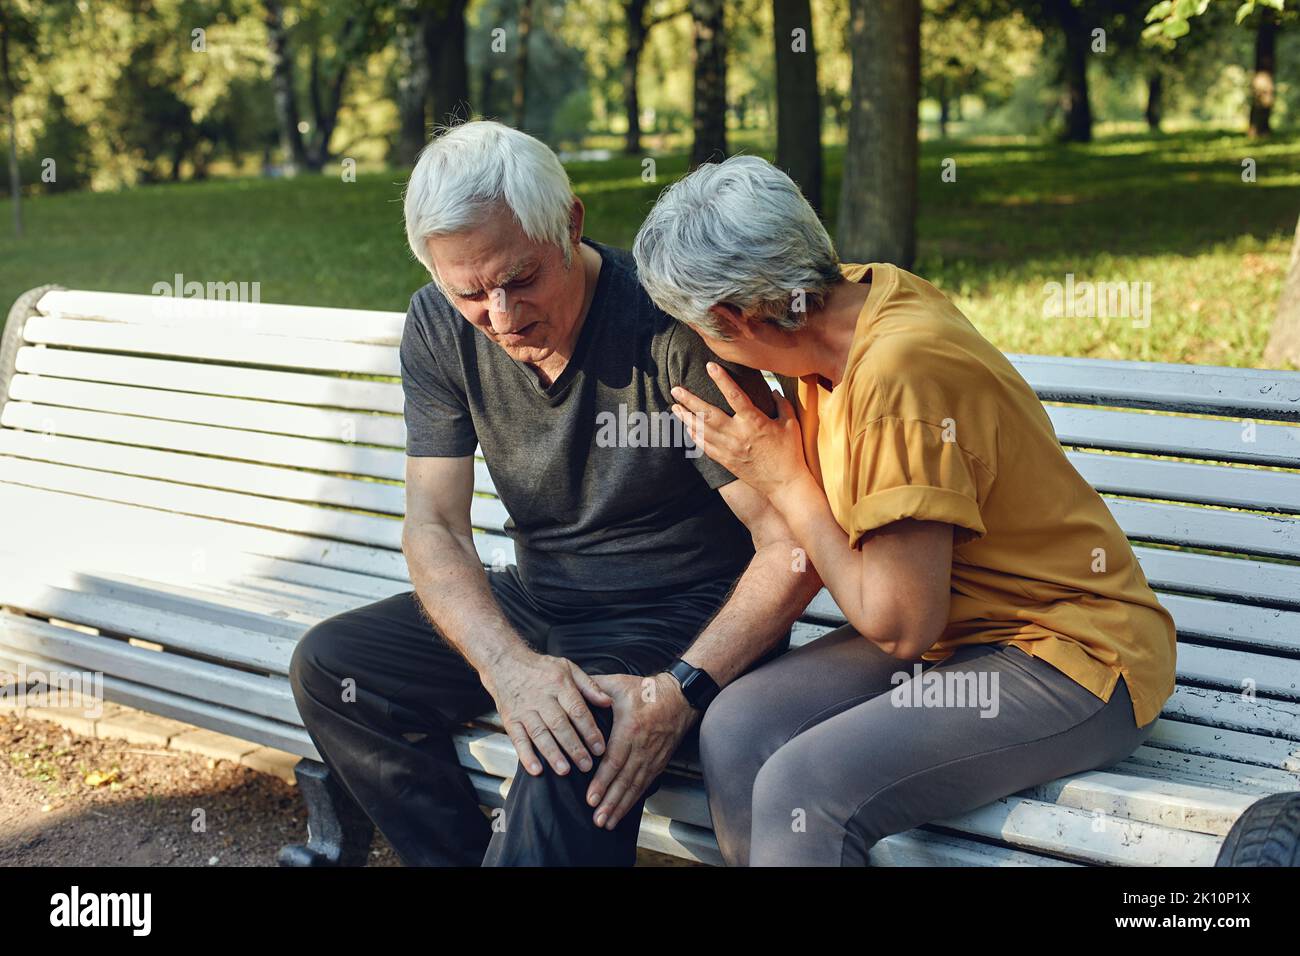 During morning sportive stroll in summer park, elderly 70s man got injured his knee, gripping leg seated in bench with caring disappointed wife. Physi Stock Photo